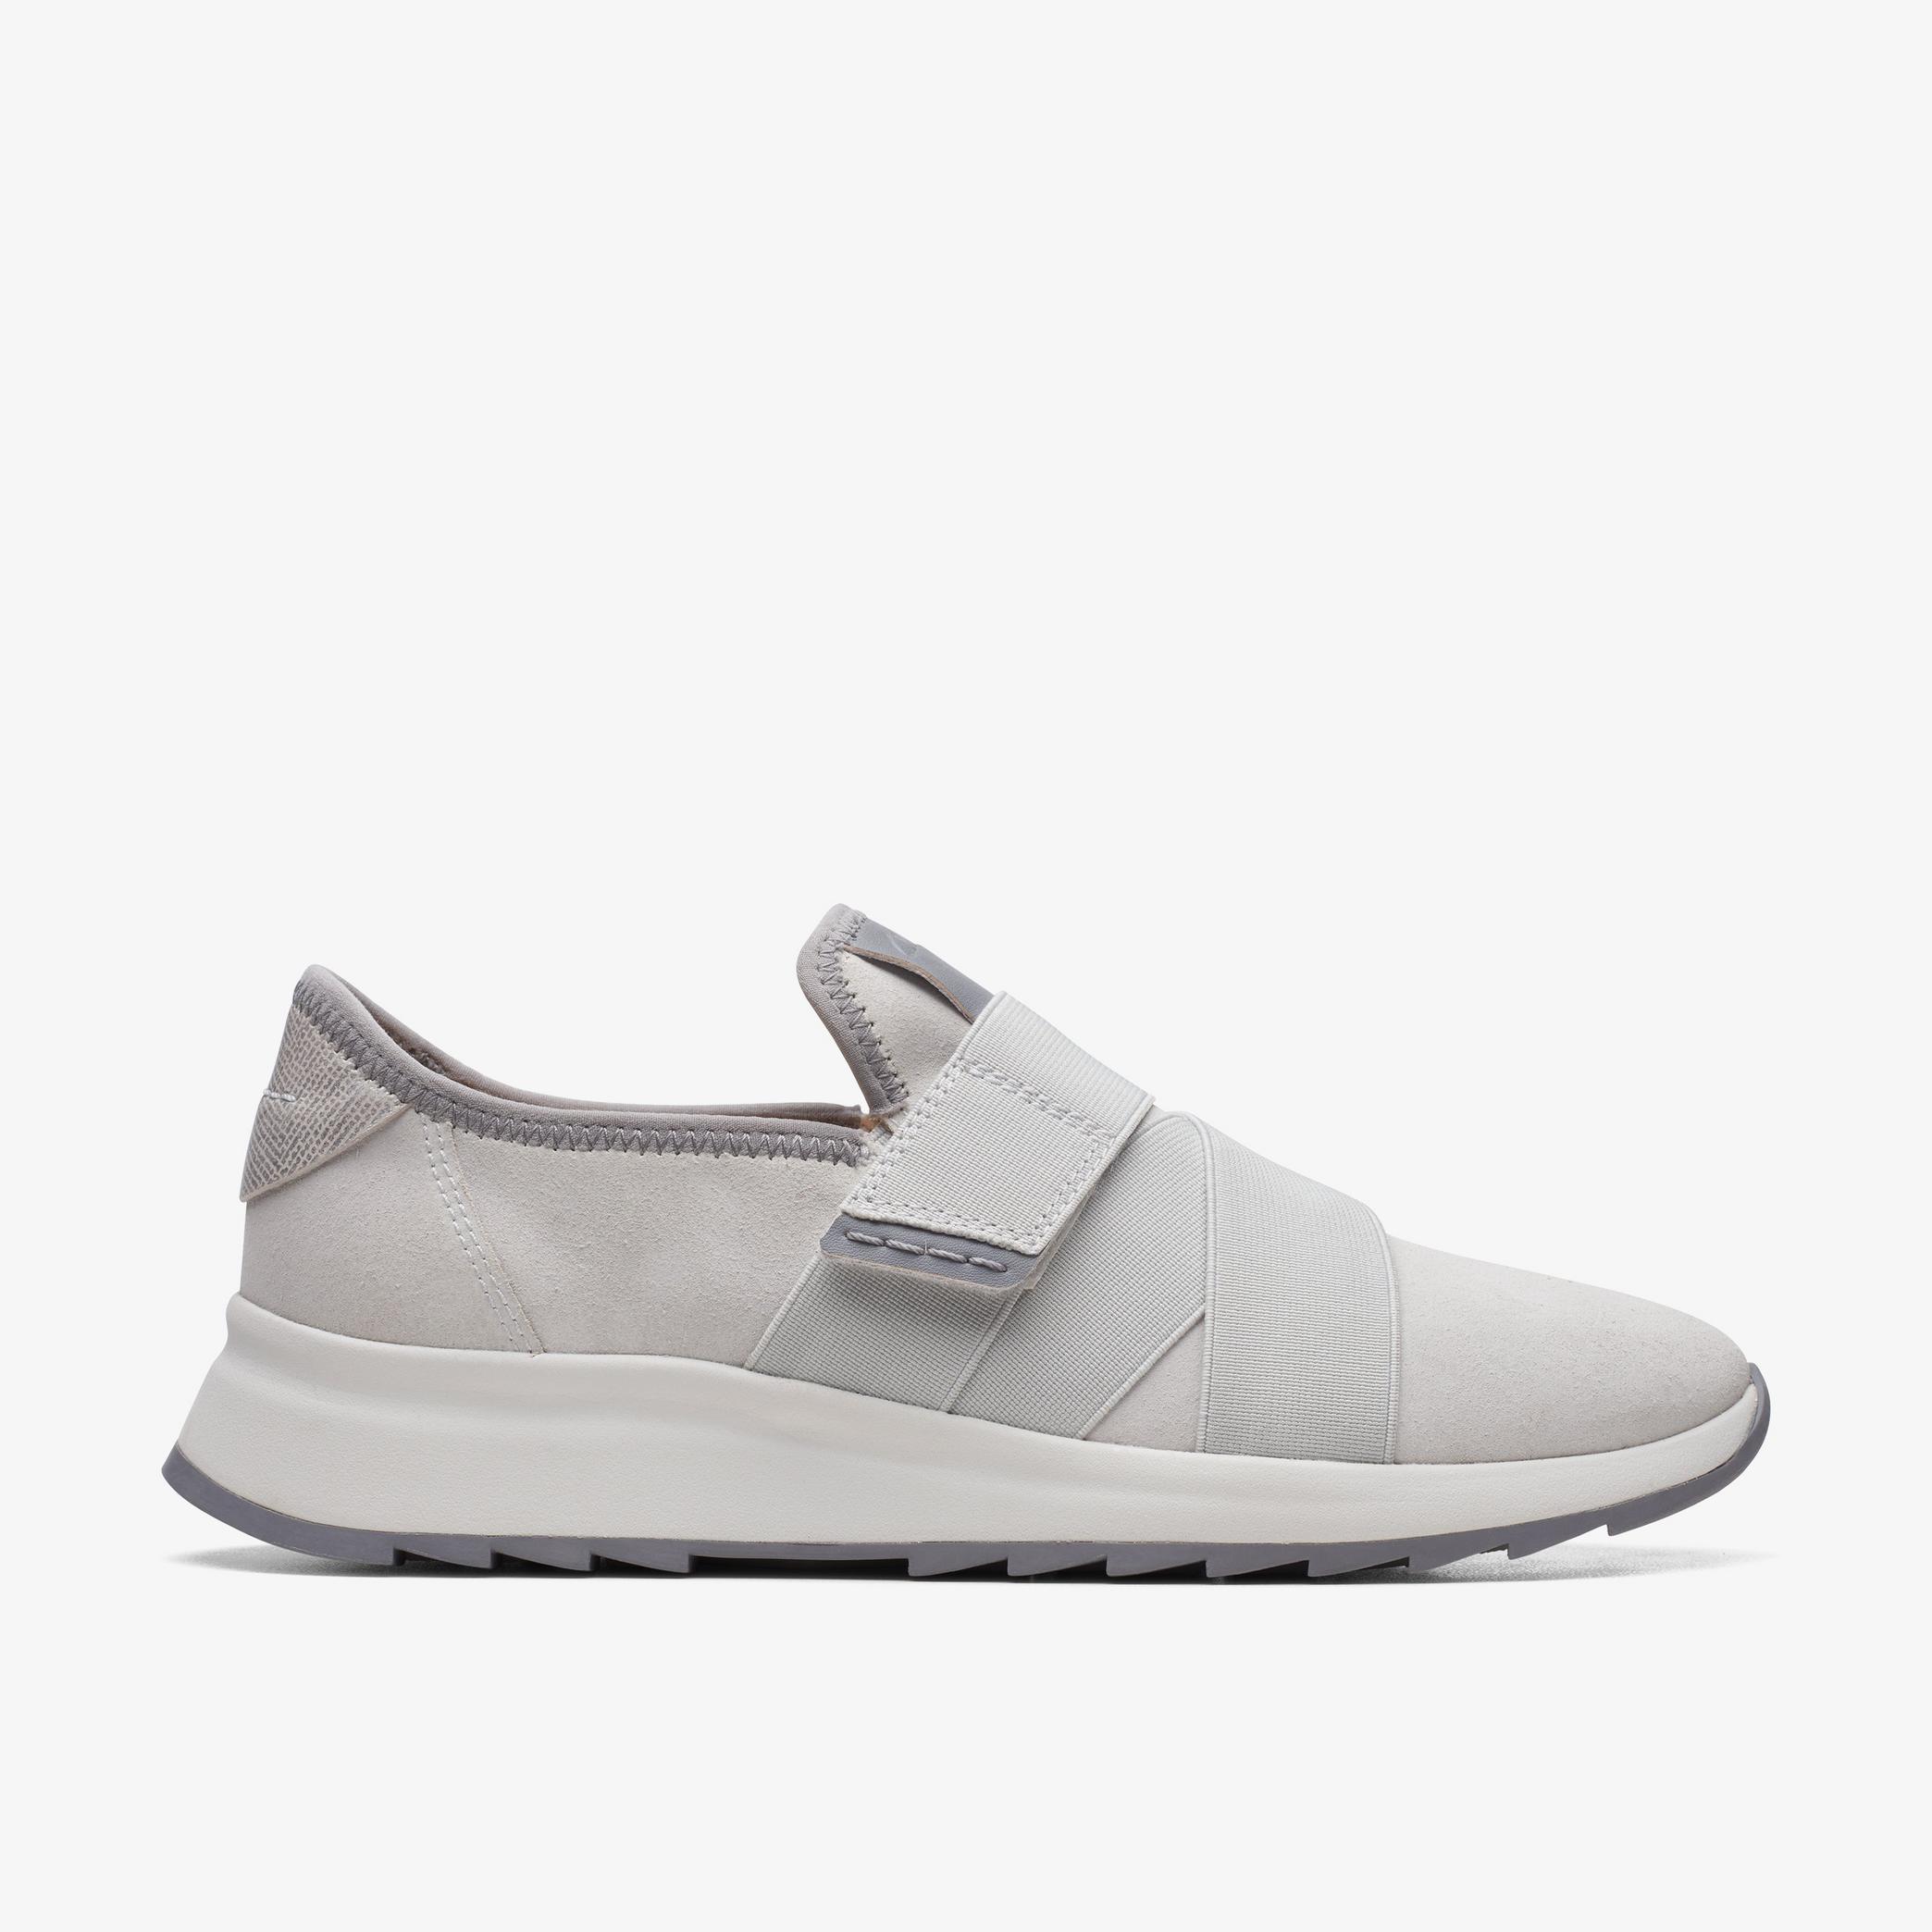 Dash Lite Strap Light Grey Combination Trainers, view 1 of 6